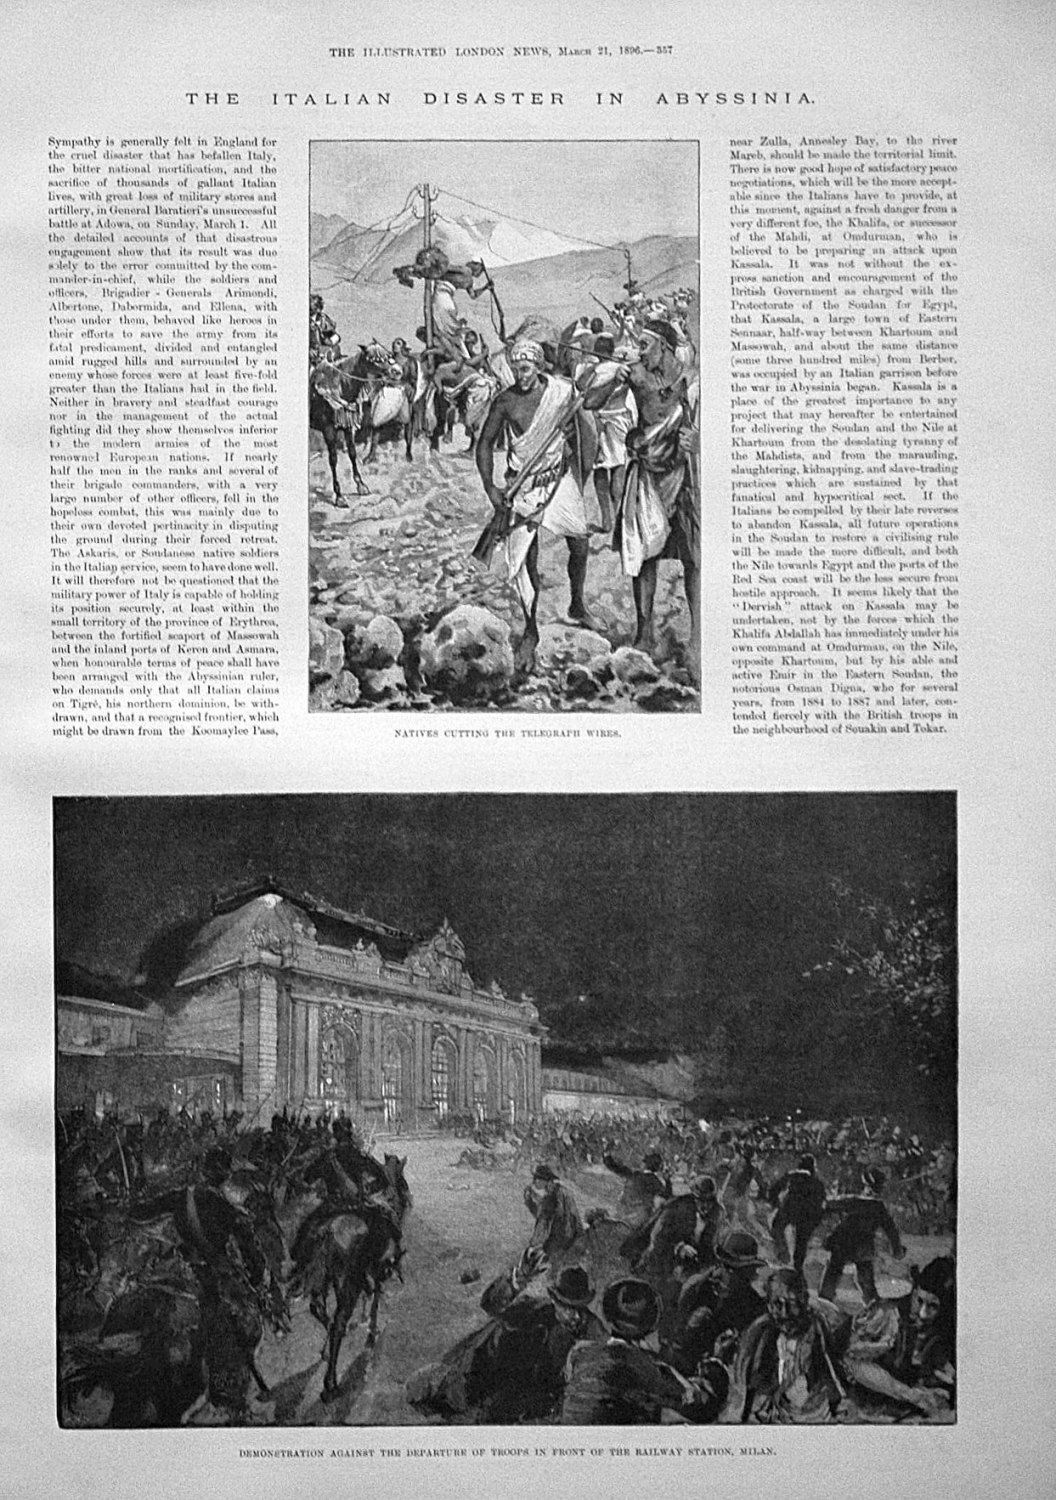 The Italian Disaster in Abyssinia. 1896